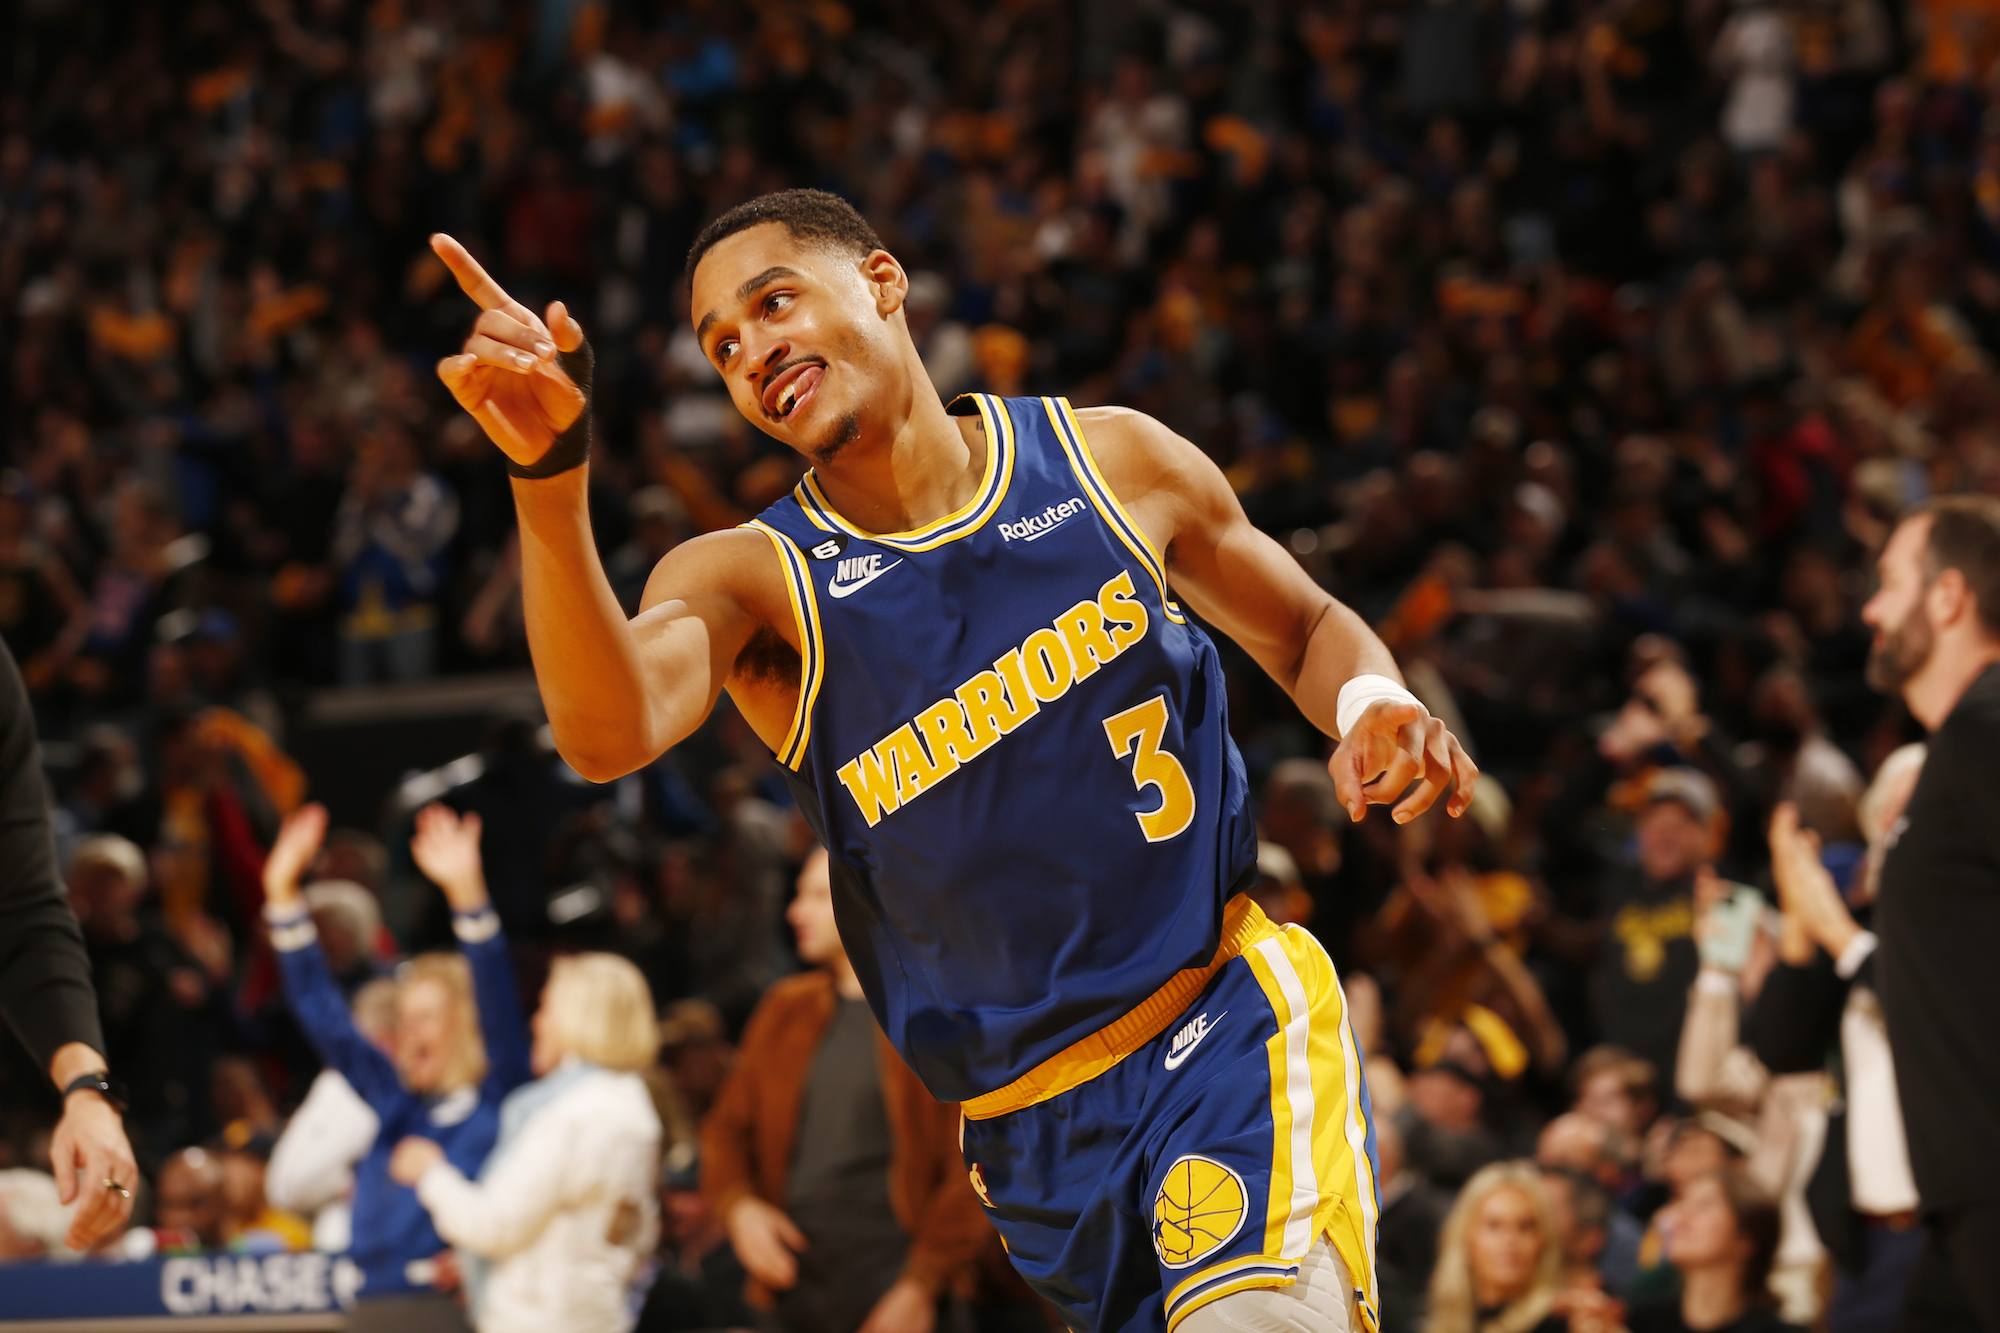 SAN FRANCISCO, CA - DECEMBER 28: Jordan Poole #3 of the Golden State Warriors celebrates during the game against the Utah Jazz on December 28, 2022 at Chase Center in San Francisco, California. NOTE TO USER: User expressly acknowledges and agrees that, by downloading and or using this photograph, user is consenting to the terms and conditions of Getty Images License Agreement. Mandatory Copyright Notice: Copyright 2022 NBAE (Photo by Jed Jacobsohn/NBAE via Getty Images)